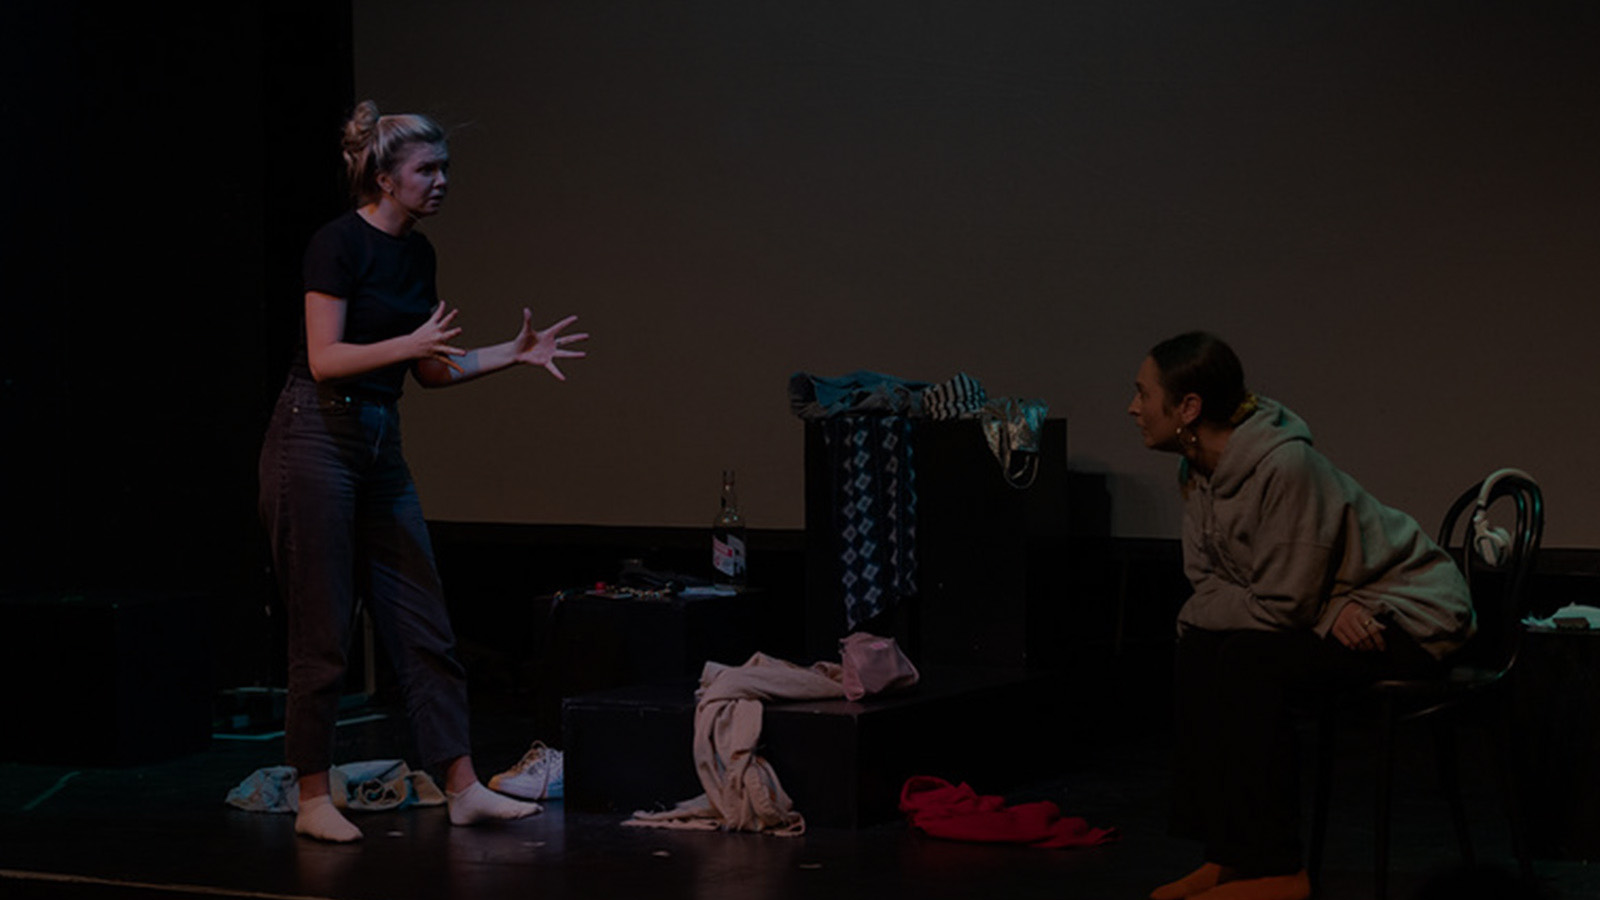 Actors on a stage. One is sitting, one standing. They are surrounded by piles of clothes.